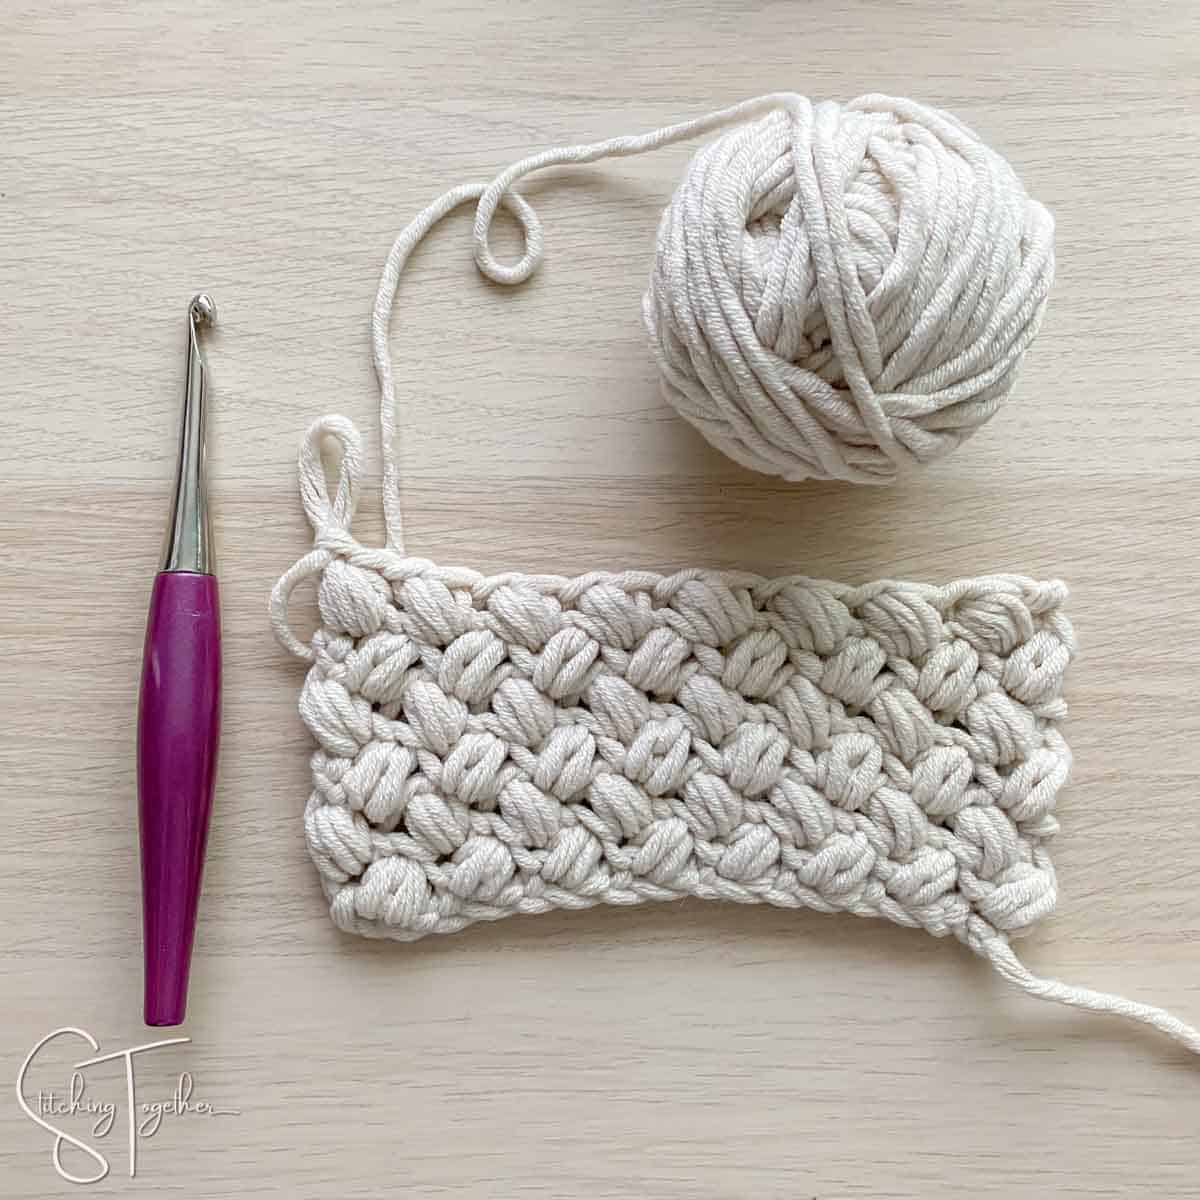 How to Do a Slip Stitch Back Loop Only - First The Coffee Crochet